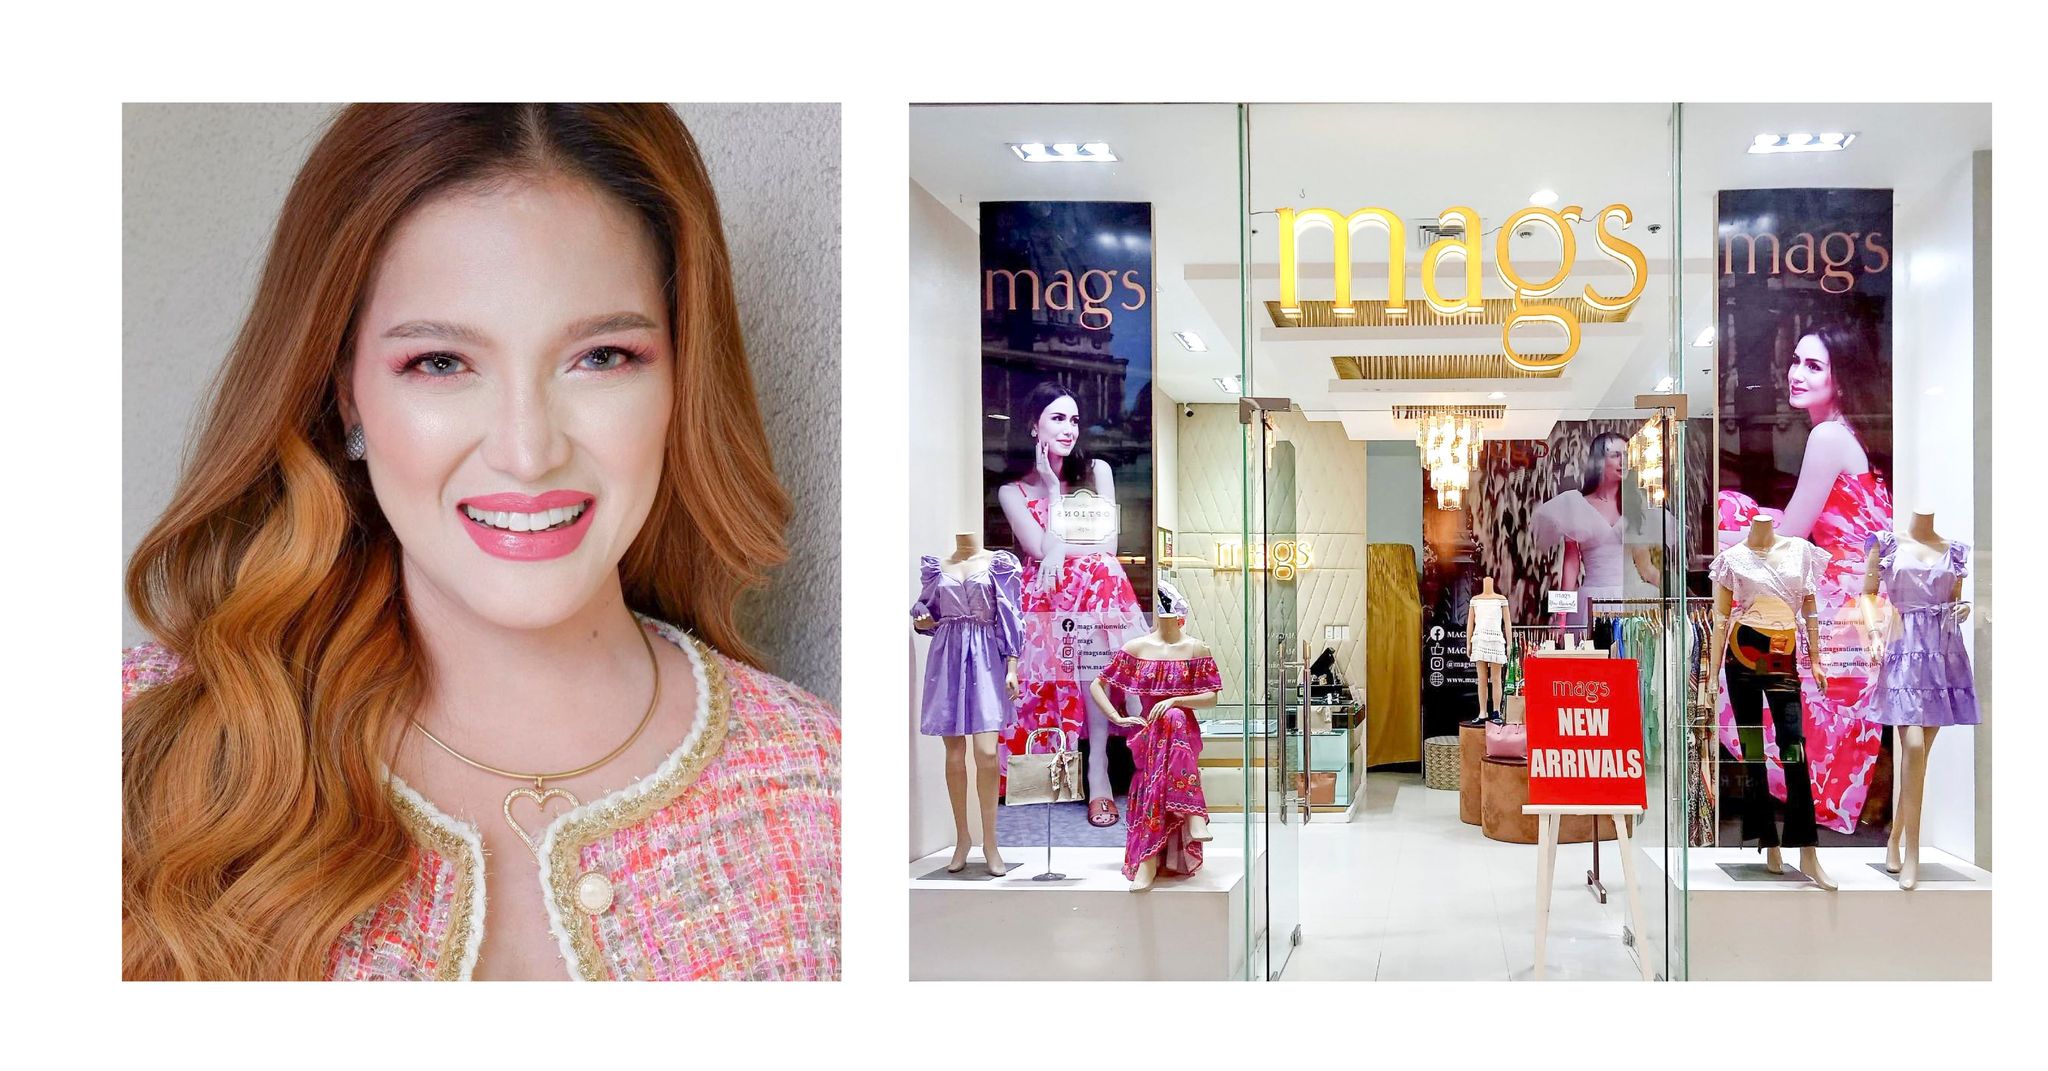 Protected: MAGS continues to empower women through fashion after 19 years